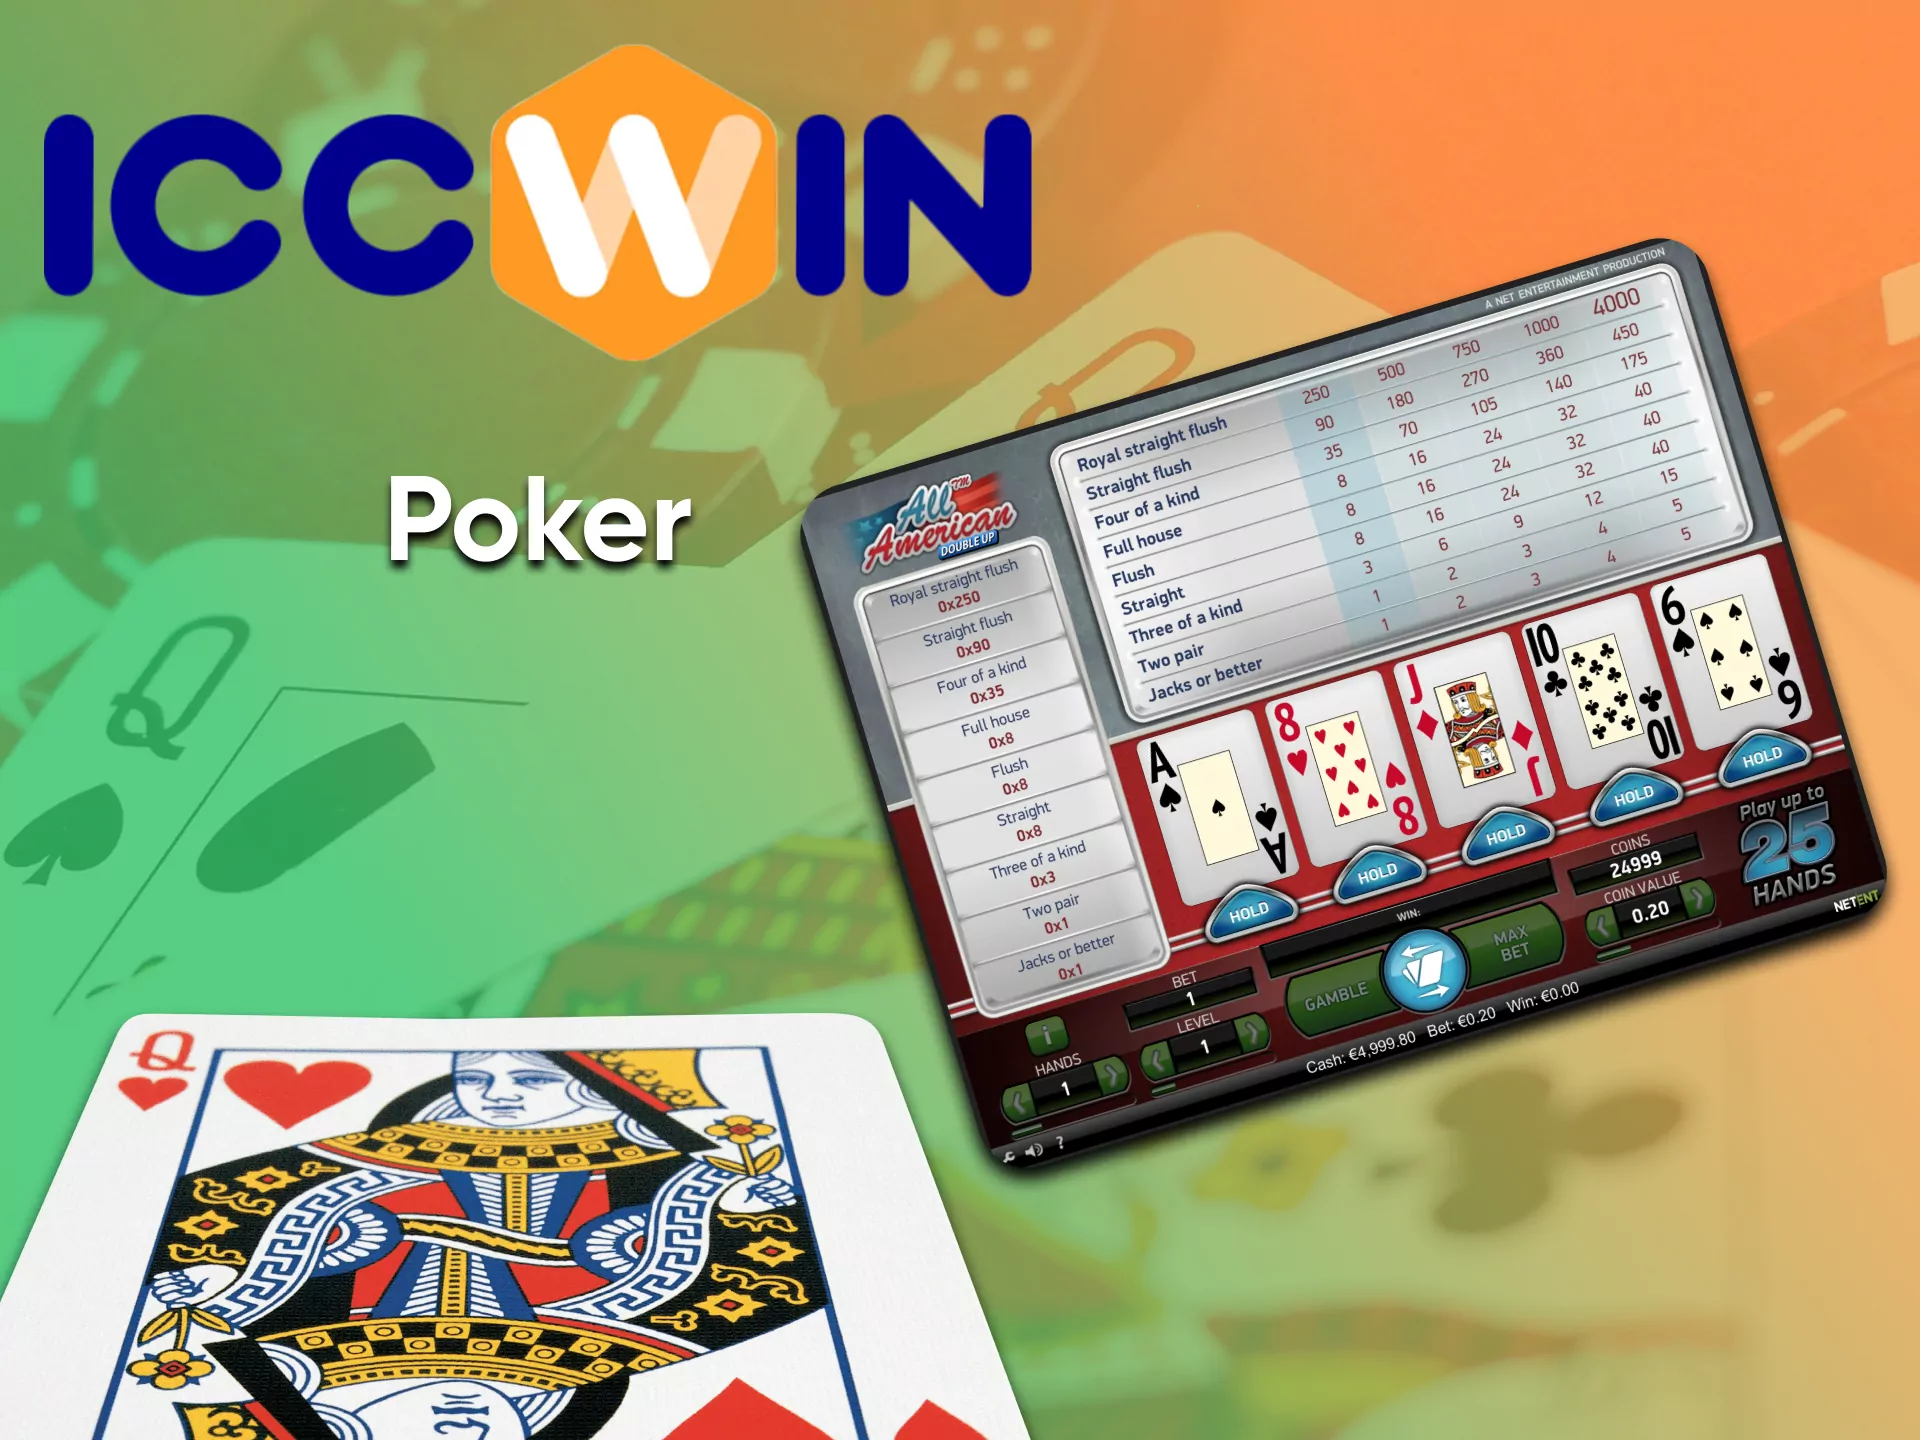 Play Poker in the casino section from ICCWin.